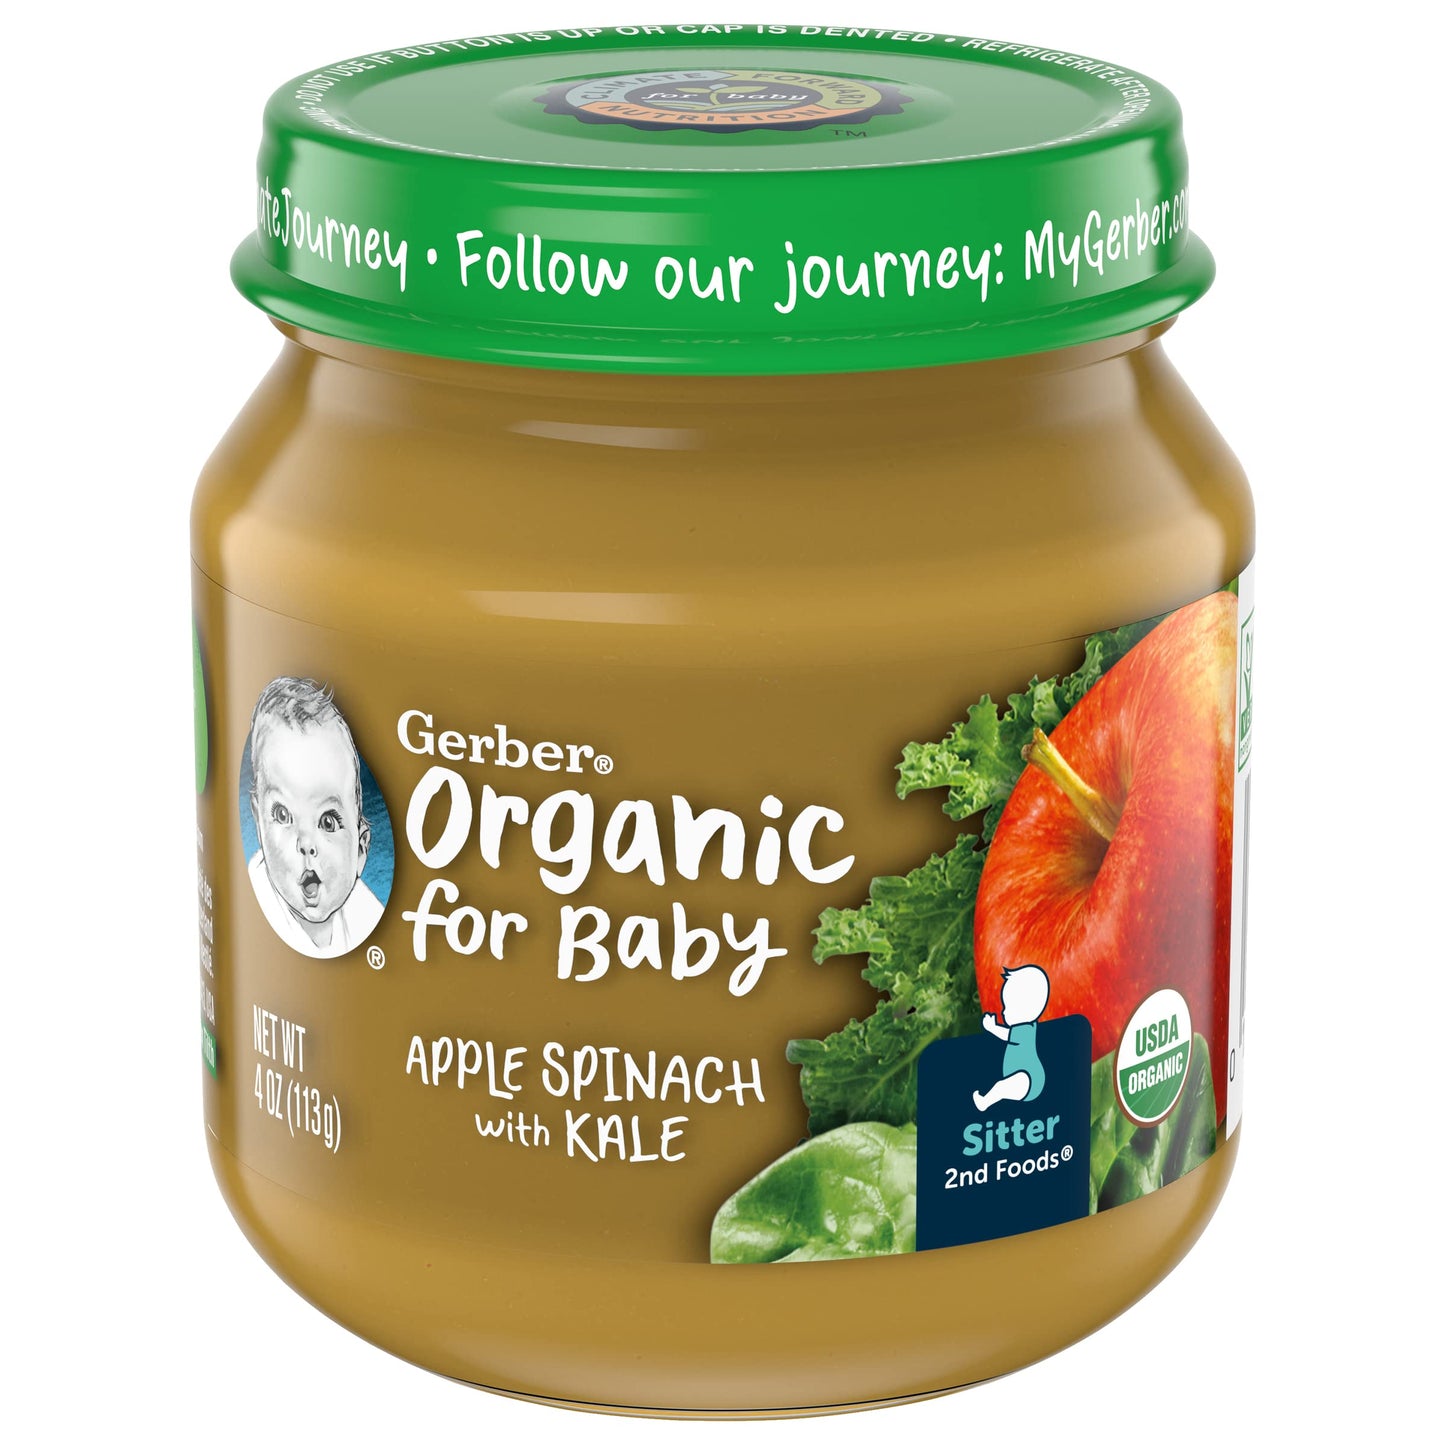 Gerber Organic Apple Spinach with Kale, 4 oz, large